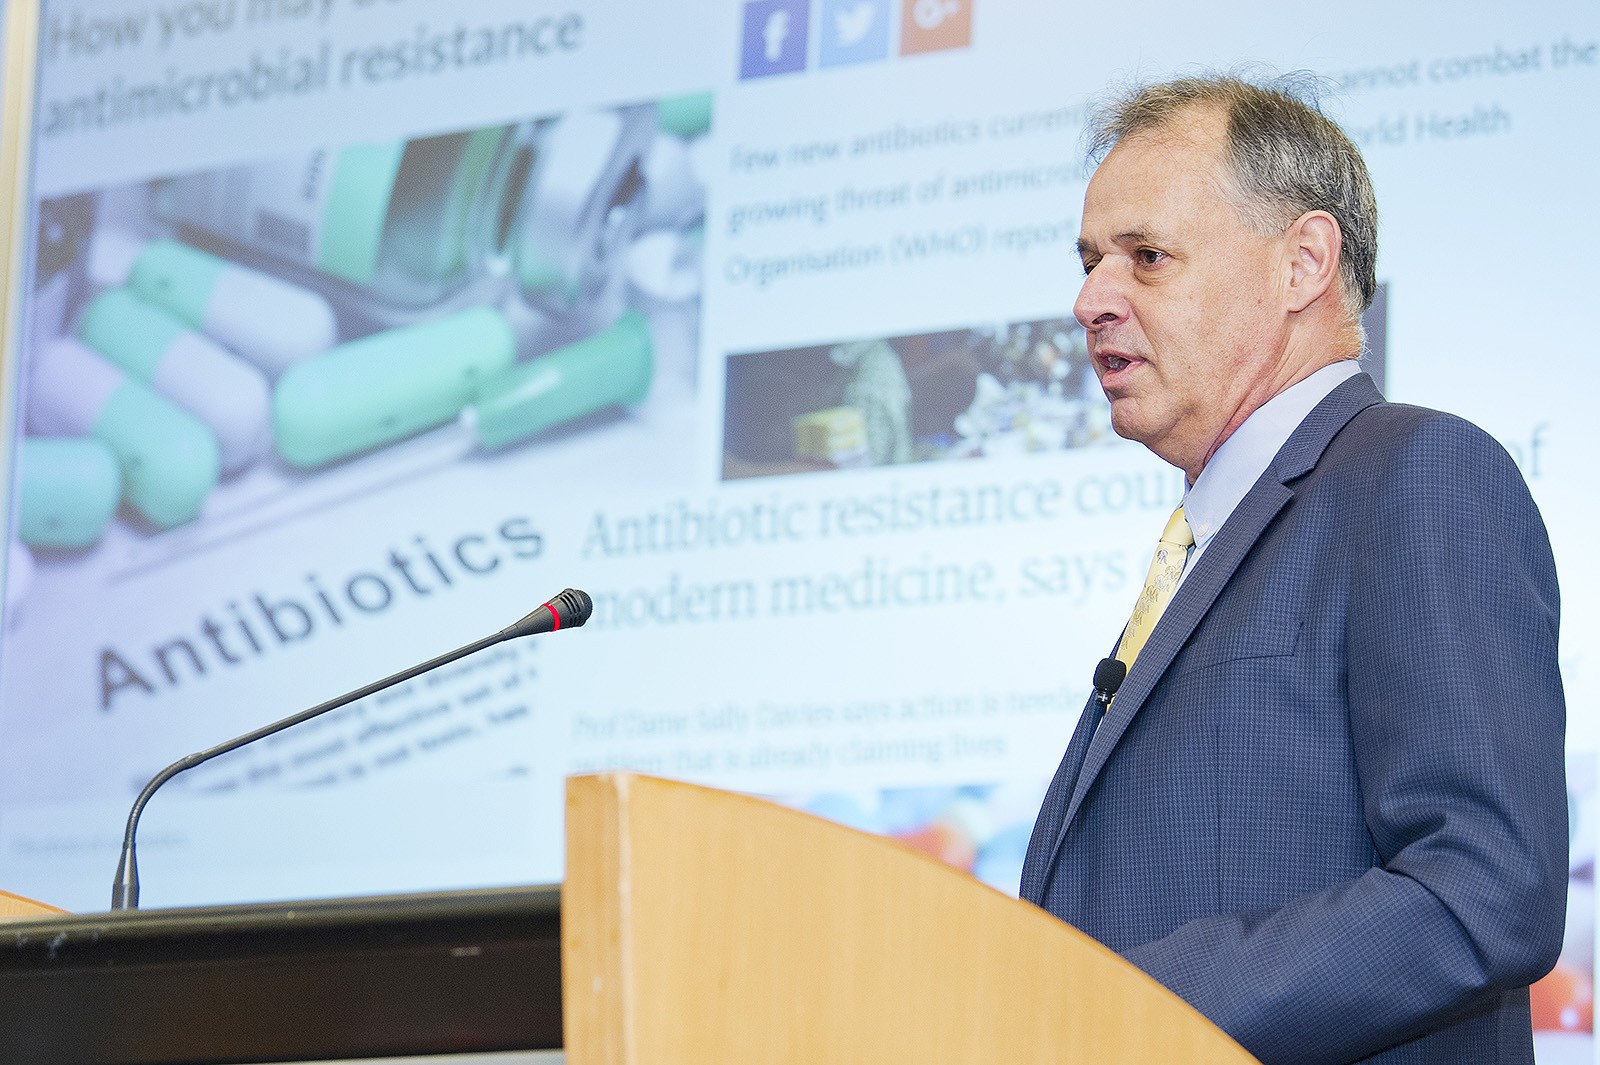 Antimicrobial resistance, or AMR, is a major threat to global health and the world economy, according to Professor Reichel at the President's Lecture Series: Excellence in Academia.